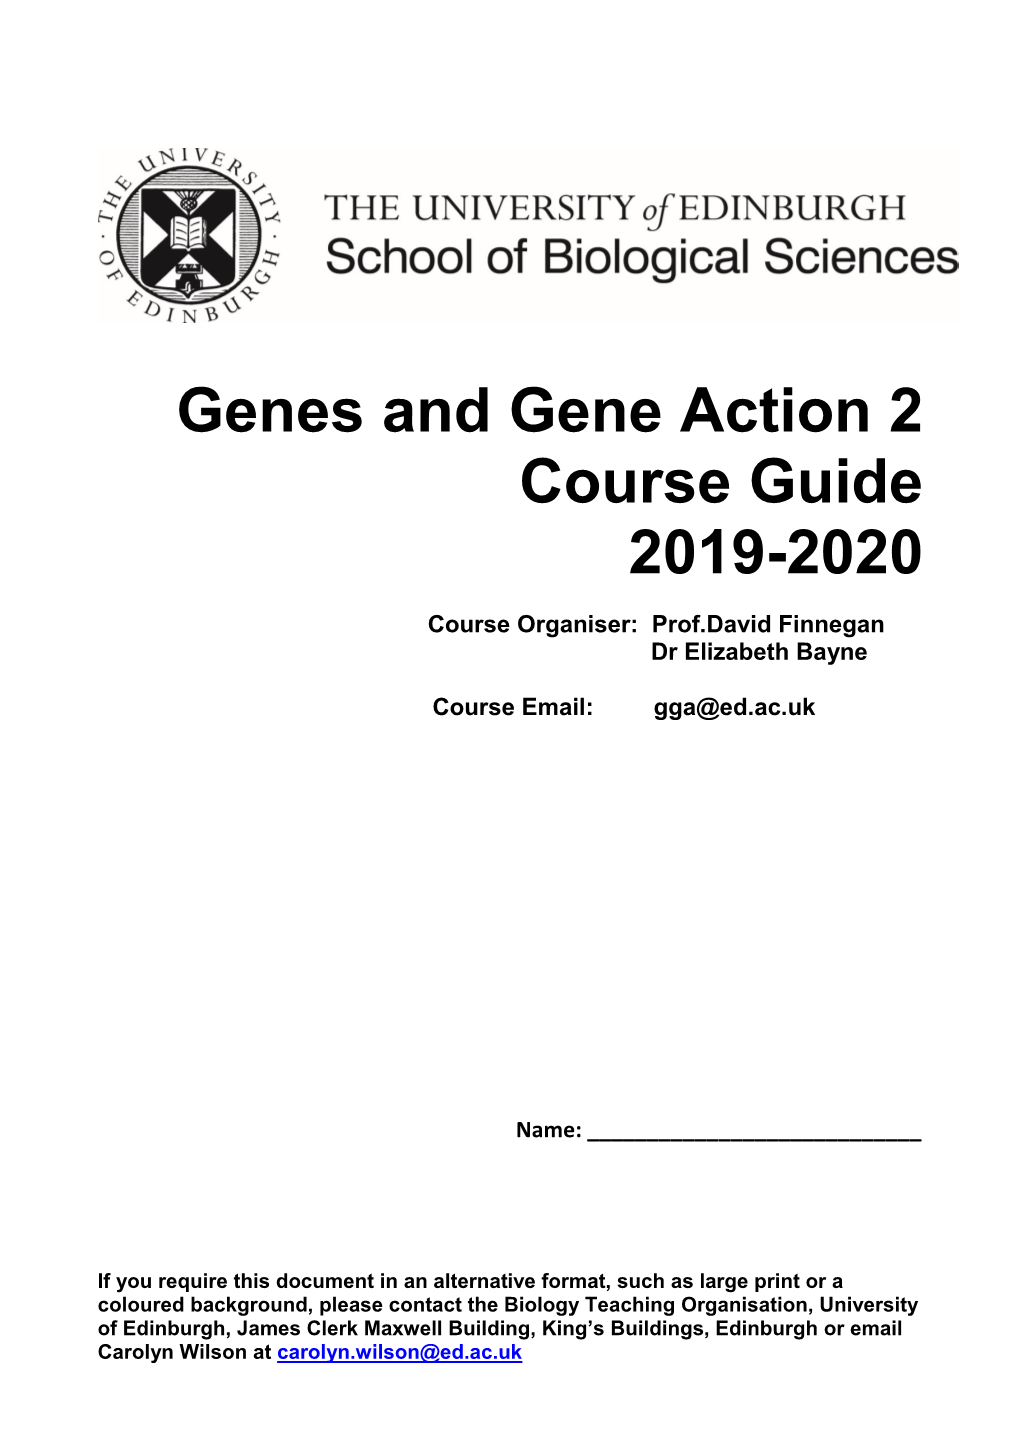 Genes and Gene Action 2 Course Guide 2019-2020